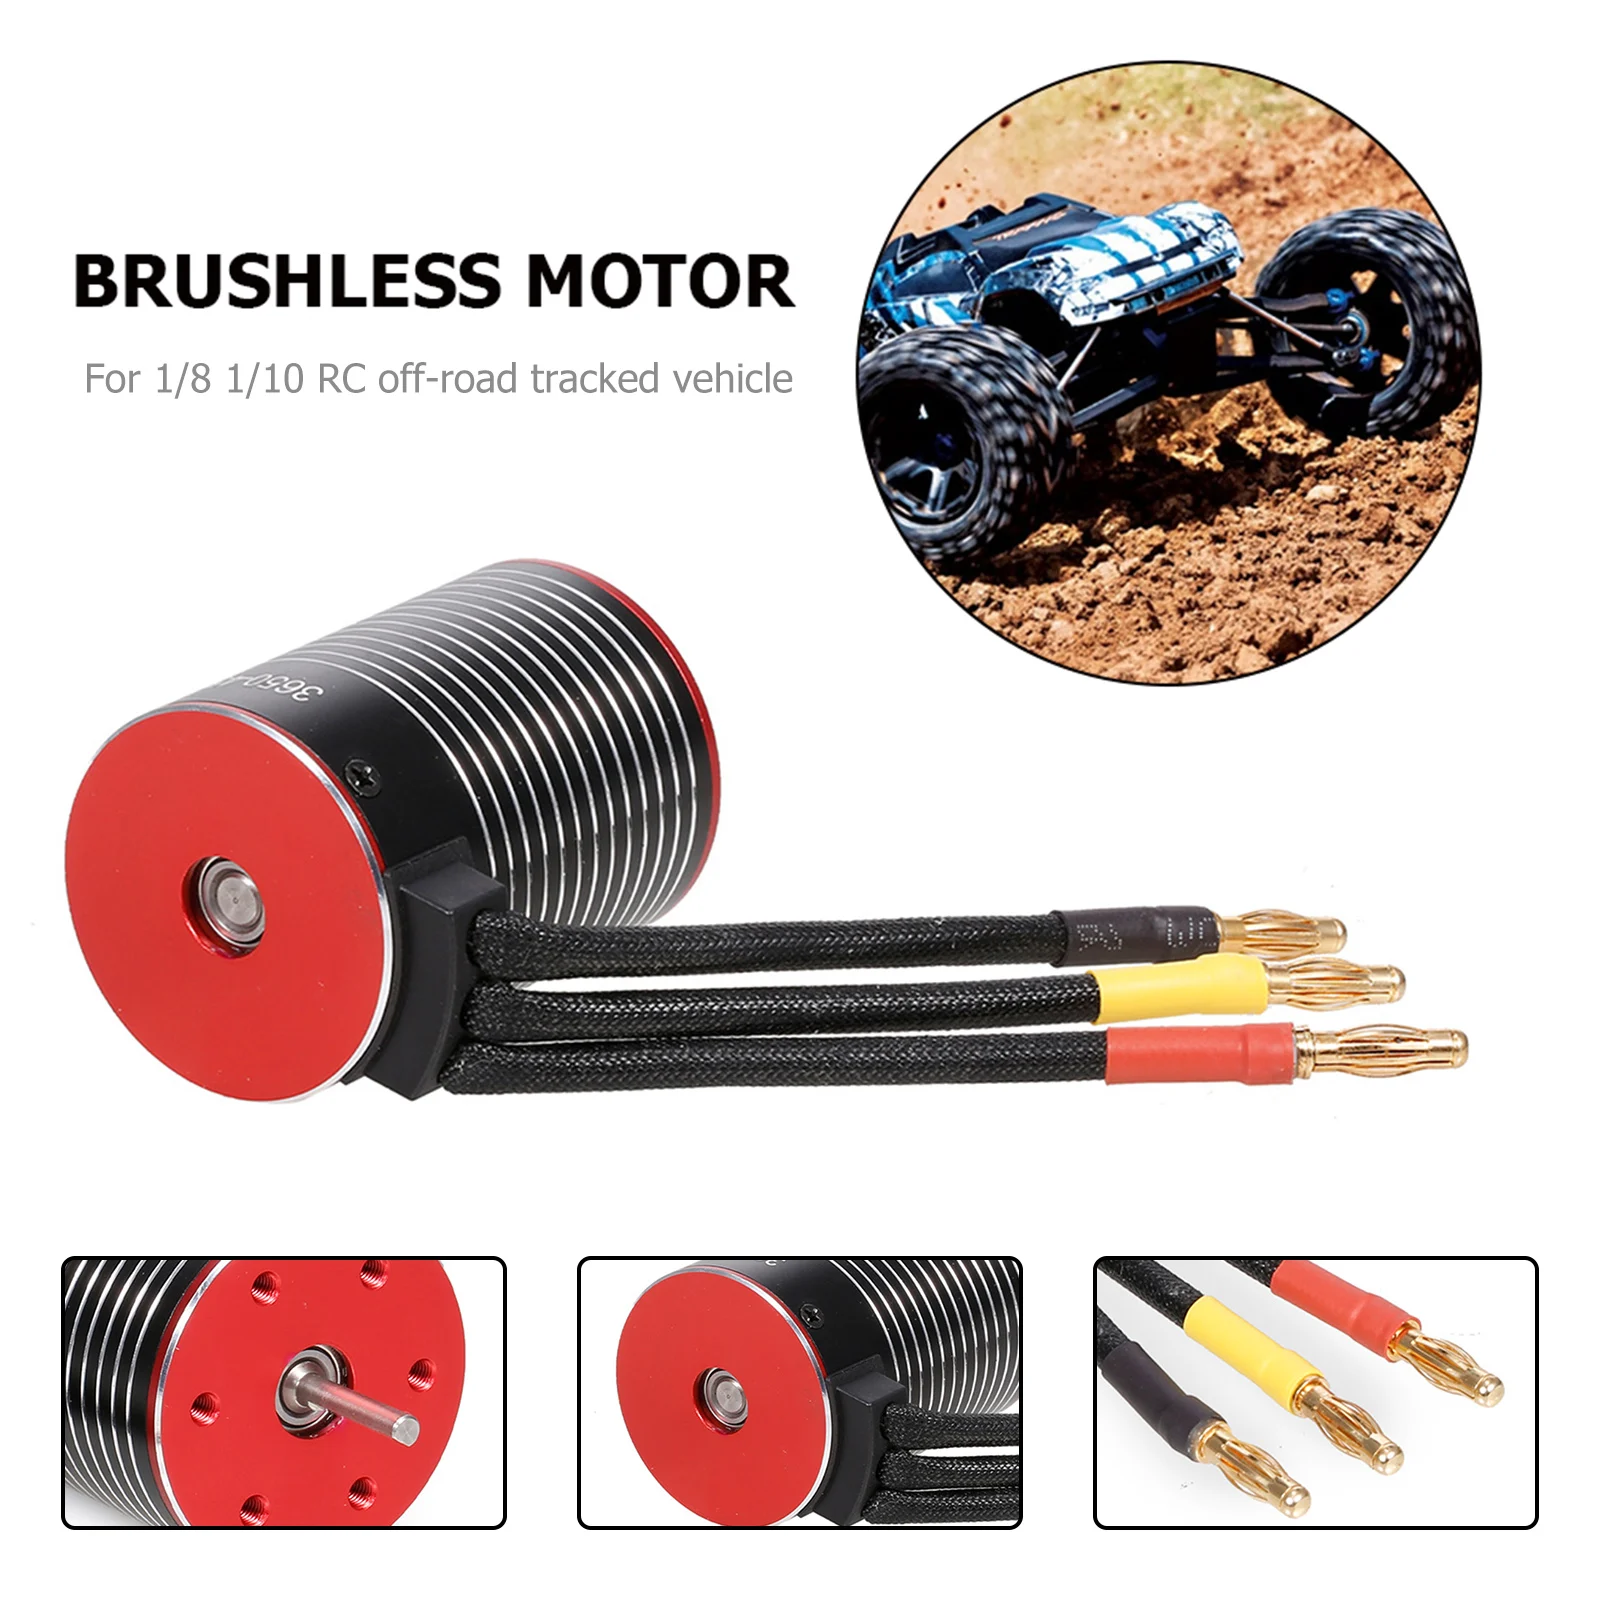 

3650 Waterproof Brushless Motor for 1/8 1/10 Redcat Hpi RC Crawler Tank Car Radiomaster Fpv Goggles Rc Crawler Accessories